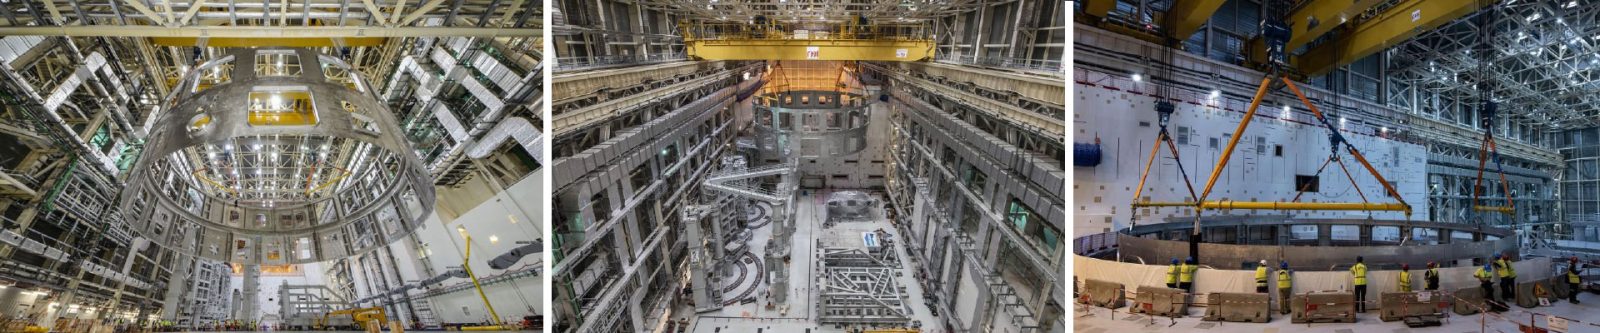 overhead cranes in full operation for ITER greatest assembly achievement